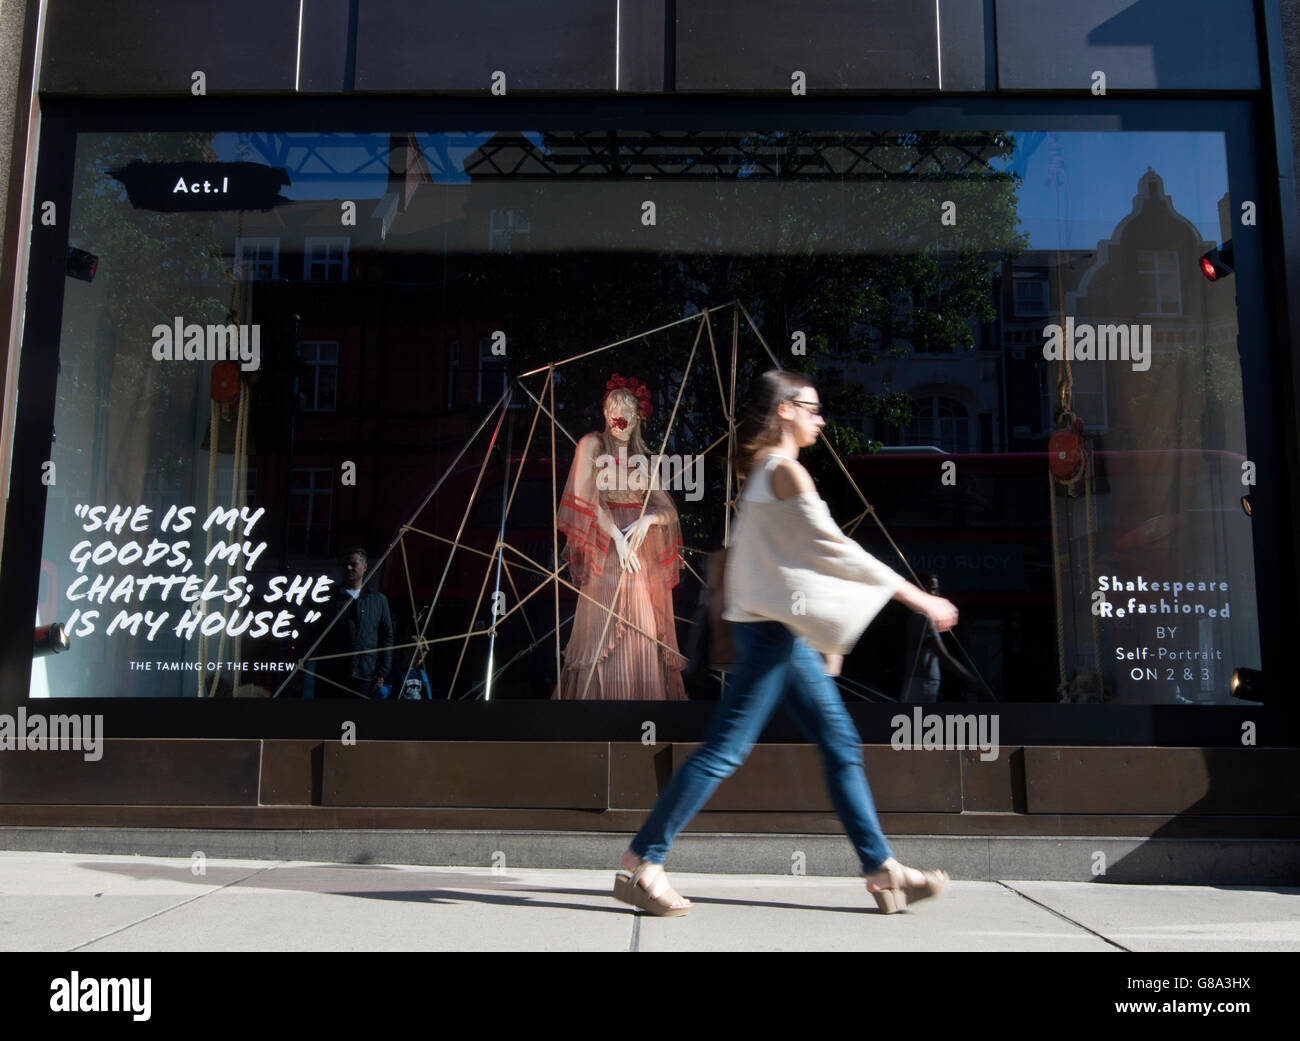 A woman walks by the Self-Portrait window at Selfridges in London, as the store launches a summer of Shakespearean celebrations to mark the 400th anniversary of the Bard's death with new window displays featuring visual interpretations of some of his best-loved plays by fashion designers. Stock Photo